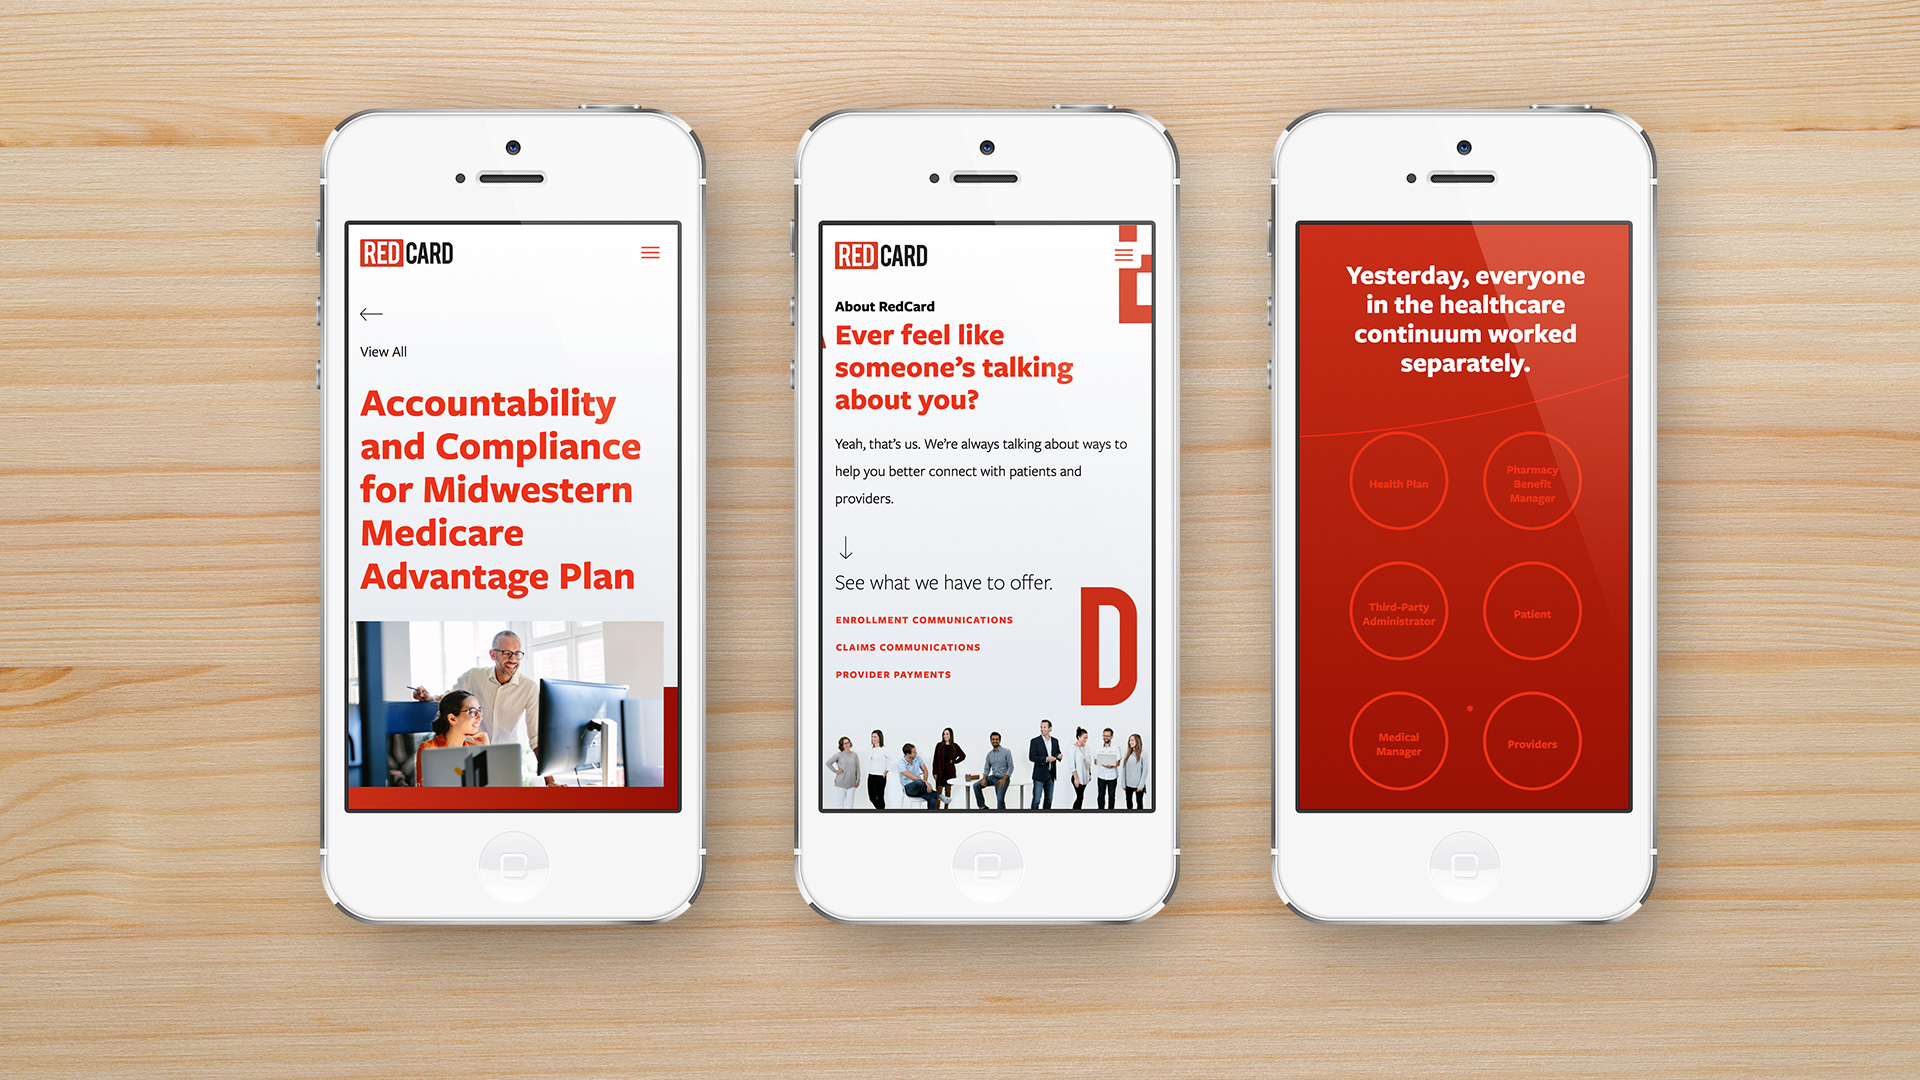 Mobile site exploration for healthcare marketing brand RedCard. Design by Atomicdust.